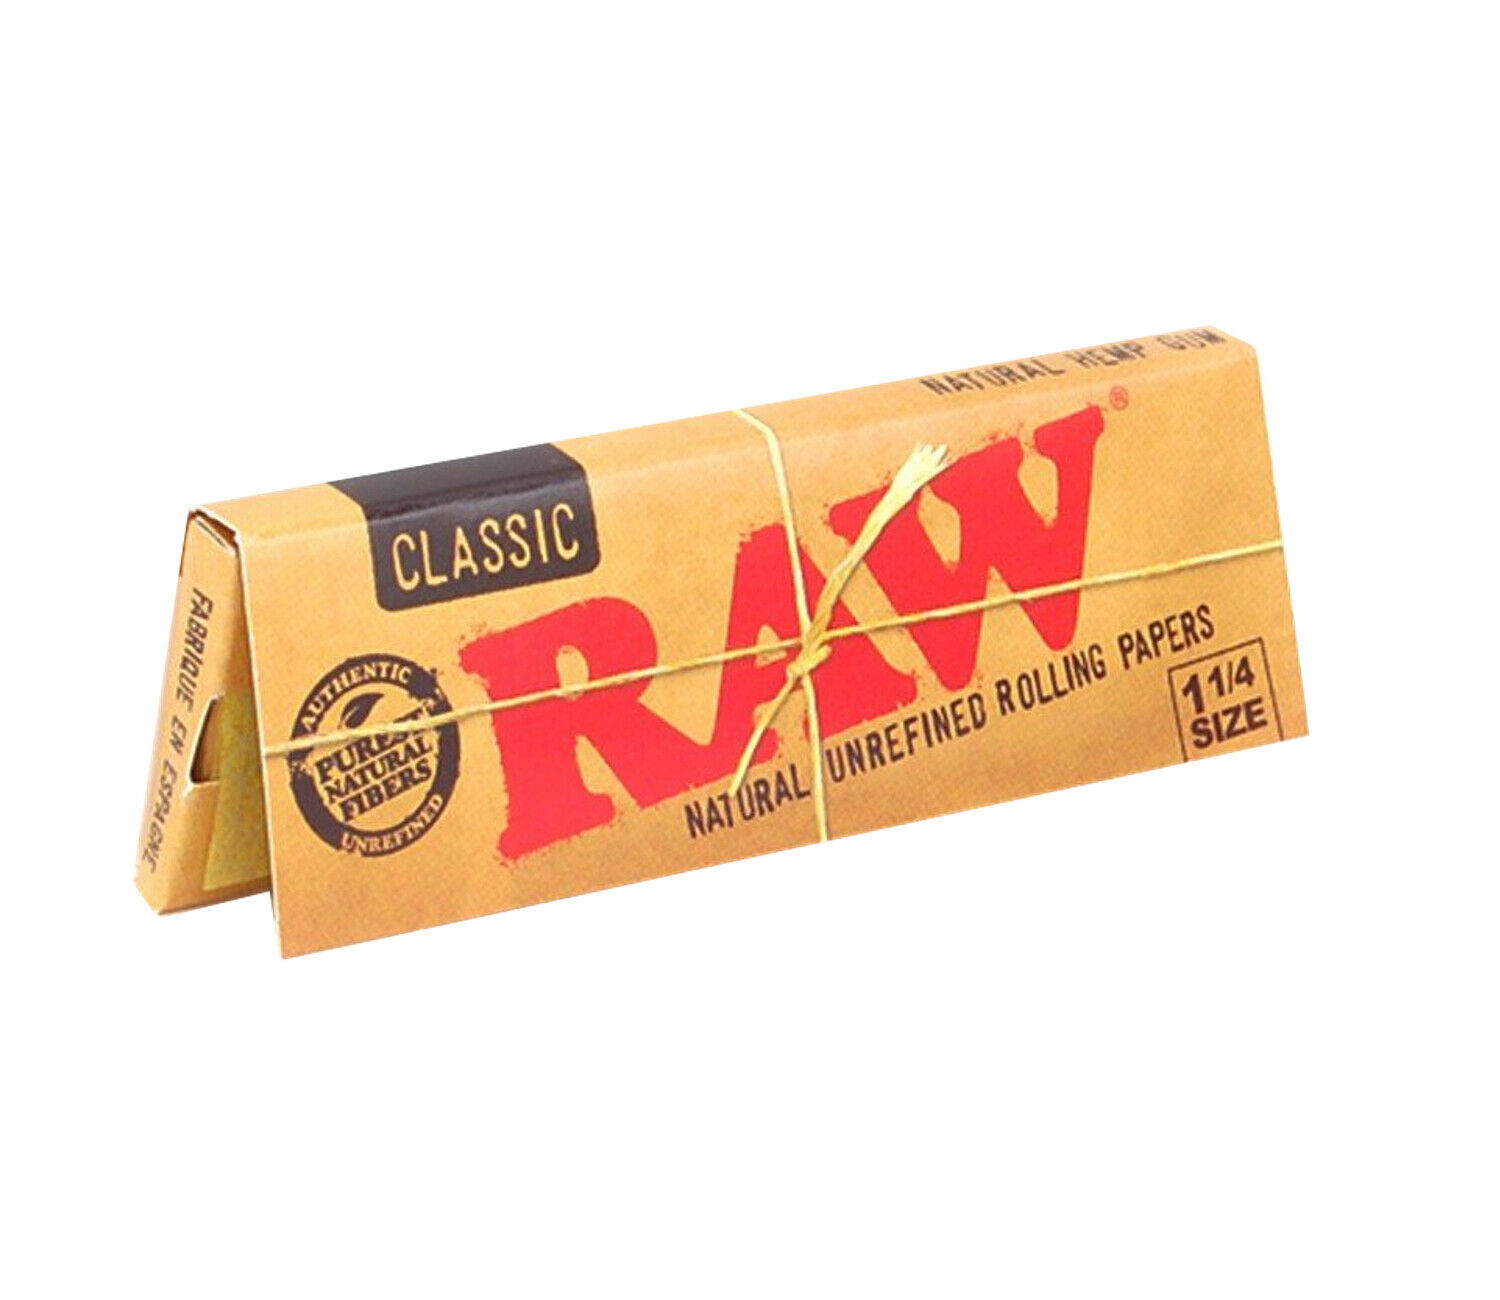 Raw natural Classic rolling paper 1 14 size 24 booklets per box